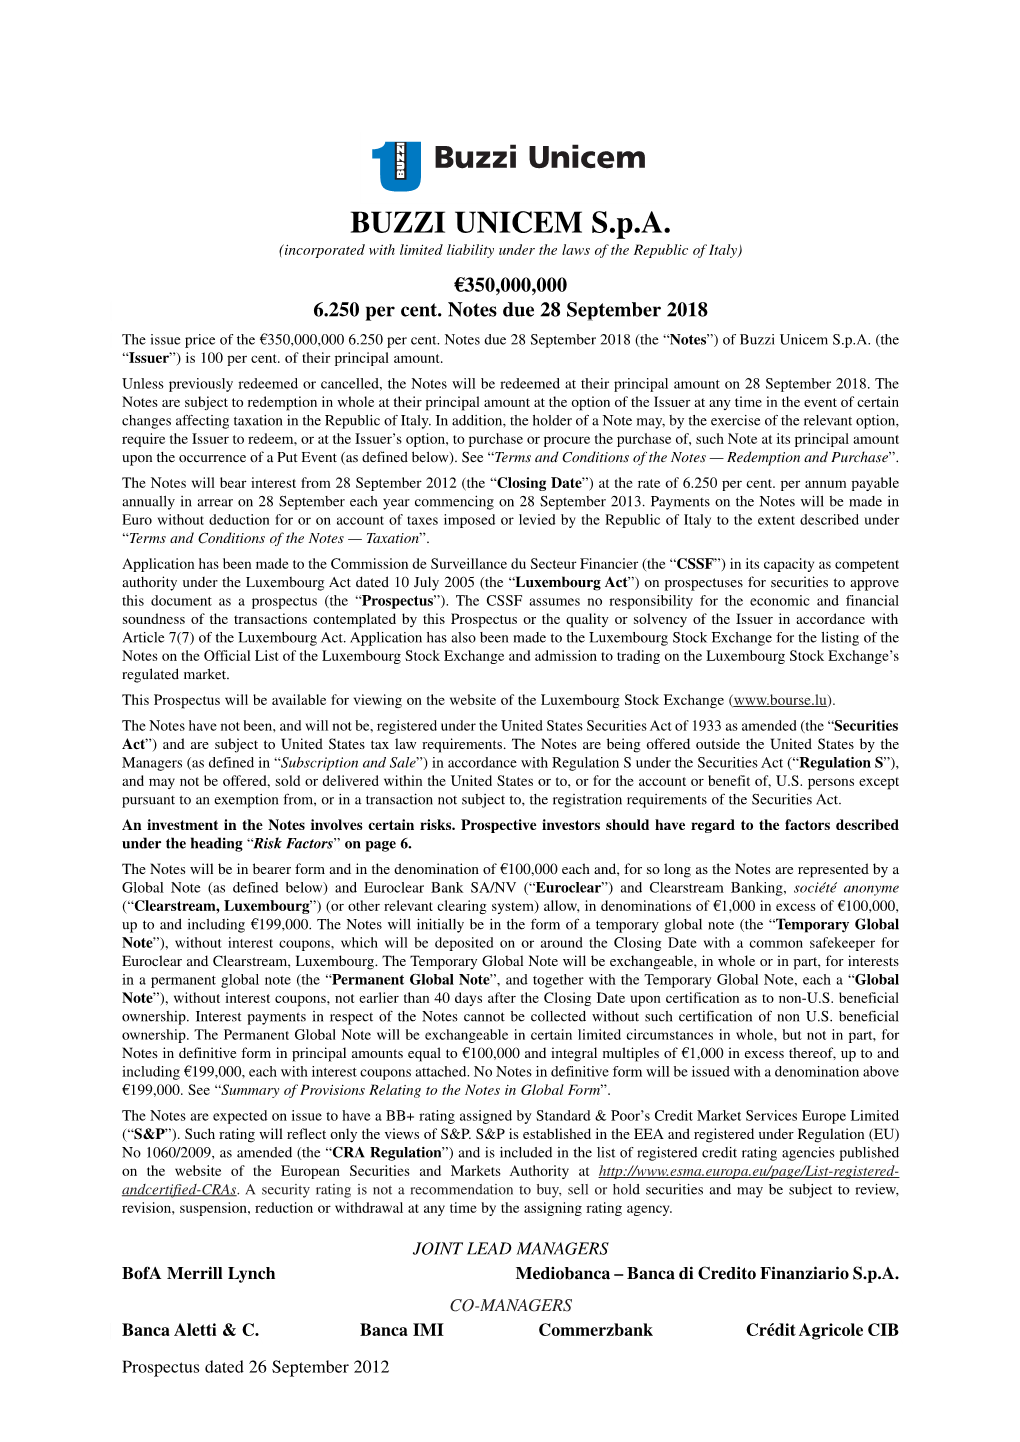 BUZZI UNICEM S.P.A. (Incorporated with Limited Liability Under the Laws of the Republic of Italy) €350,000,000 6.250 Per Cent